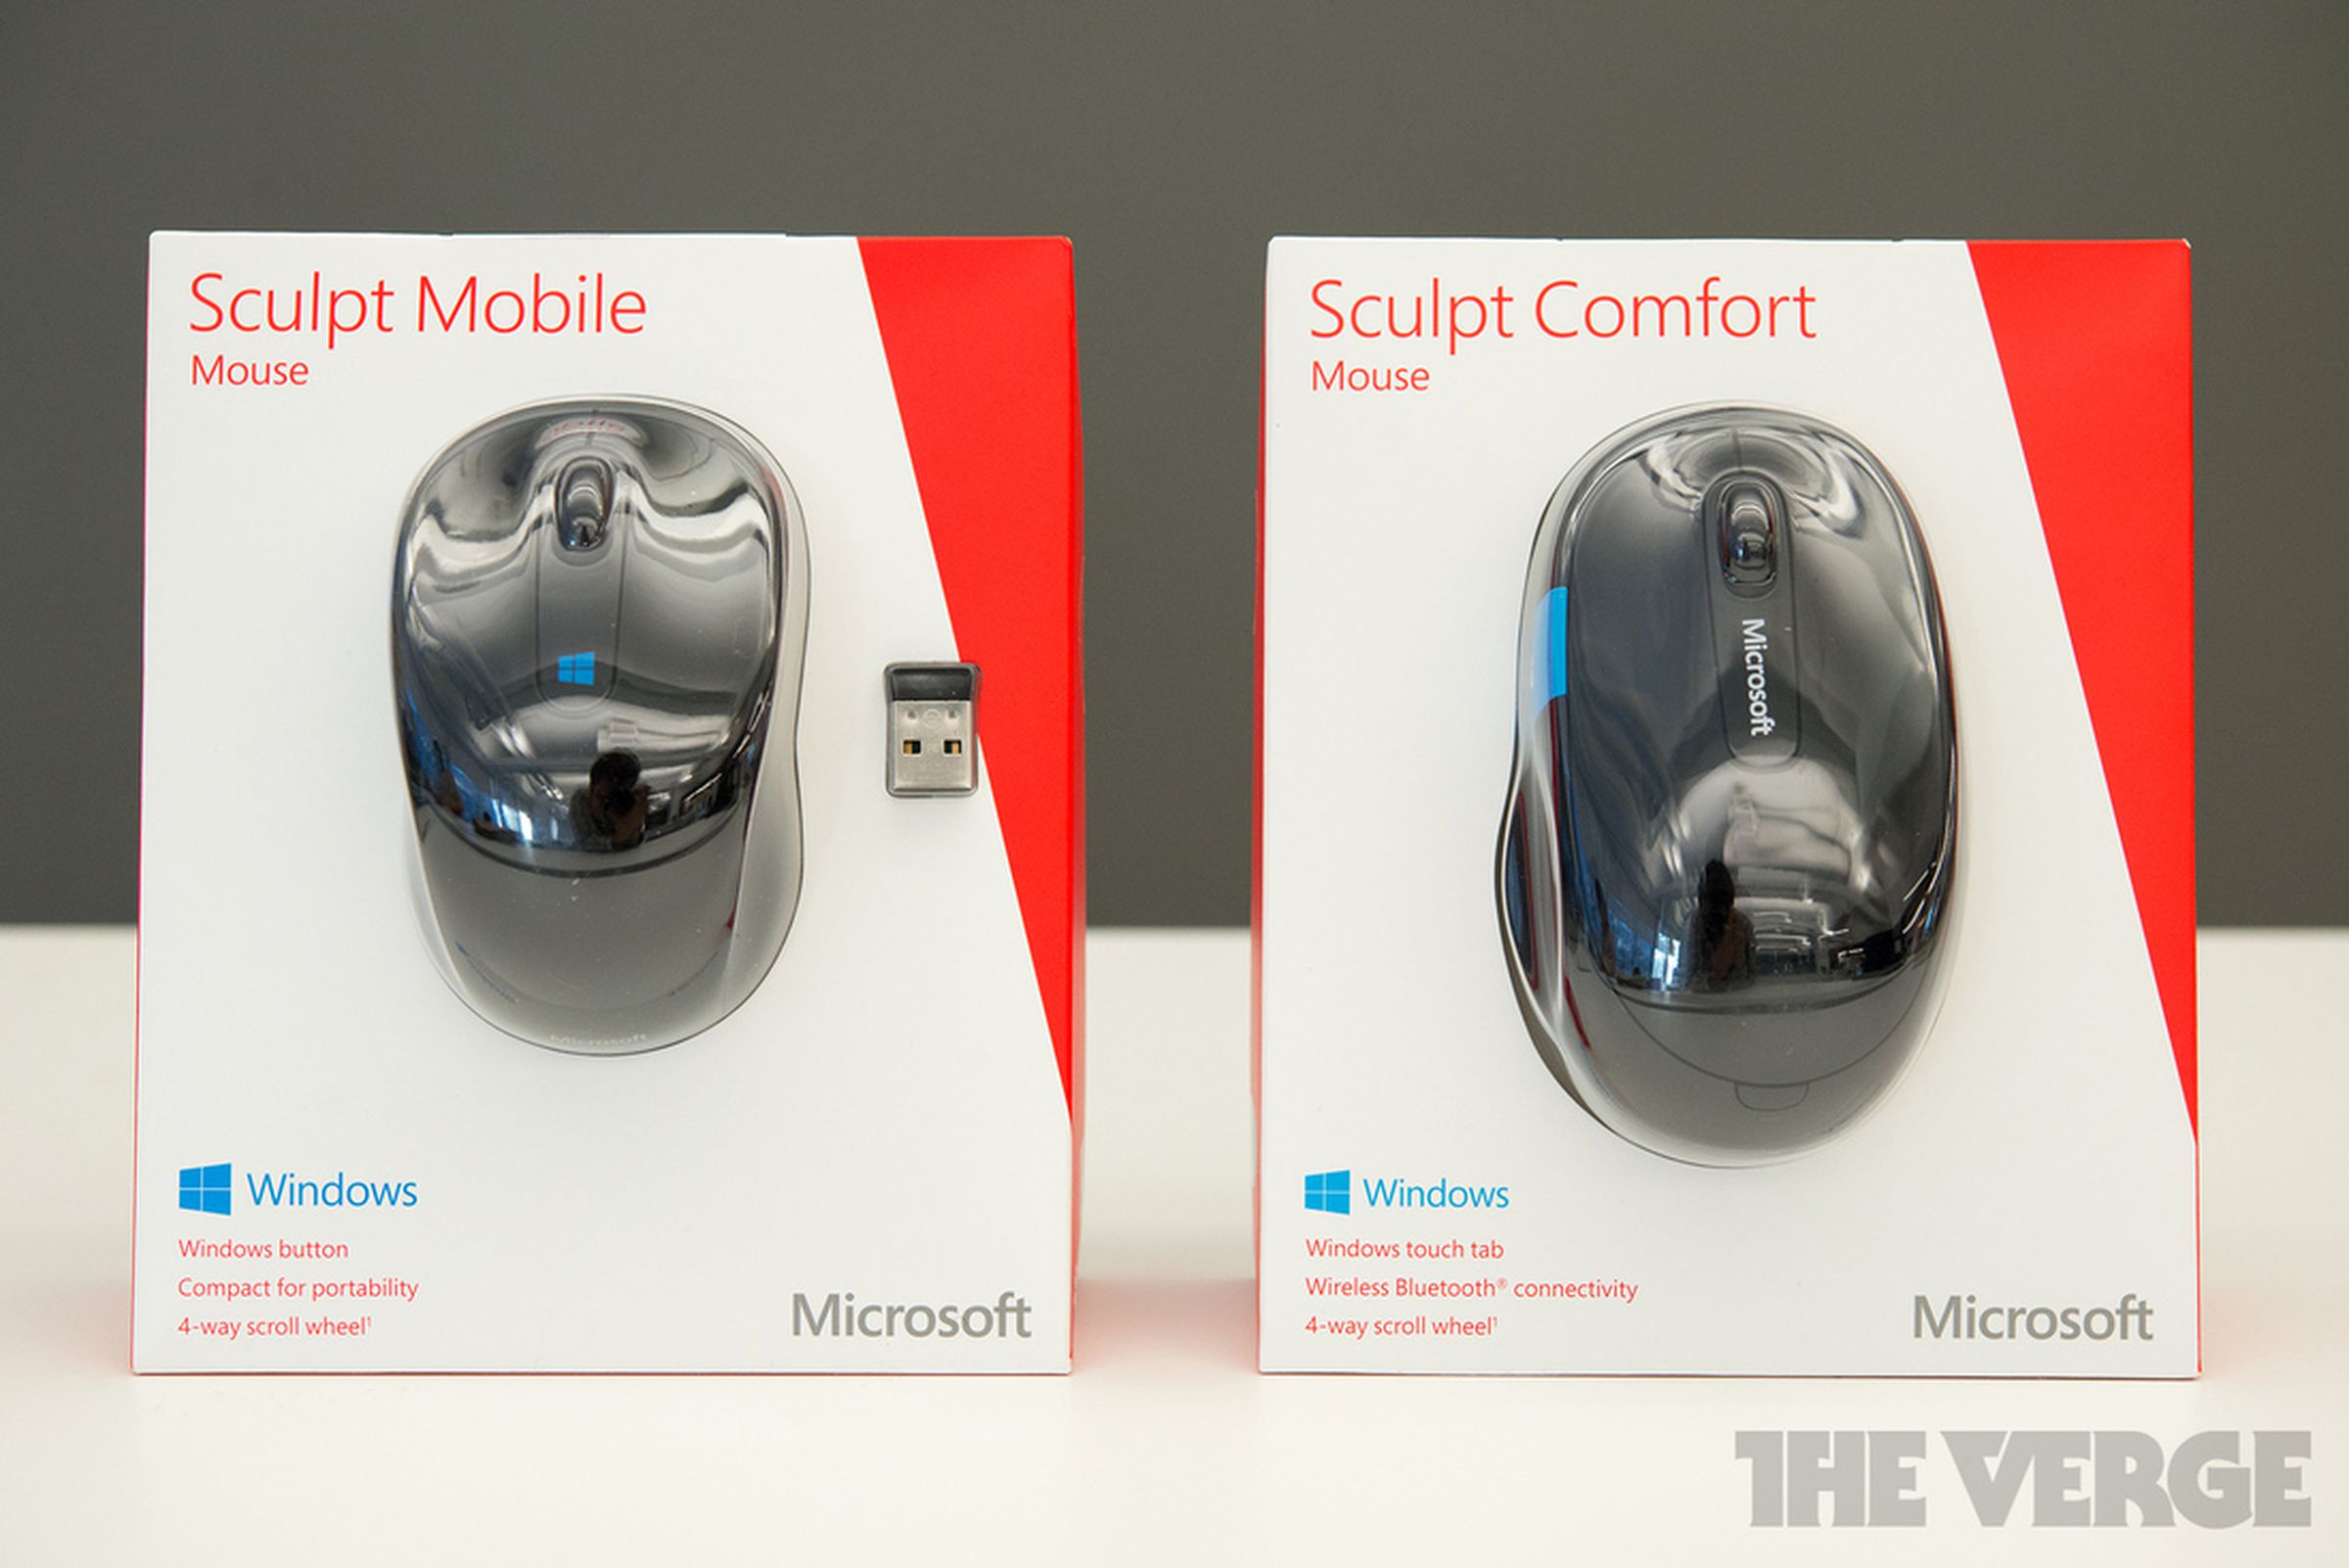 Microsoft Sculpt Comfort and Sculpt Mobile mice hands-on pictures